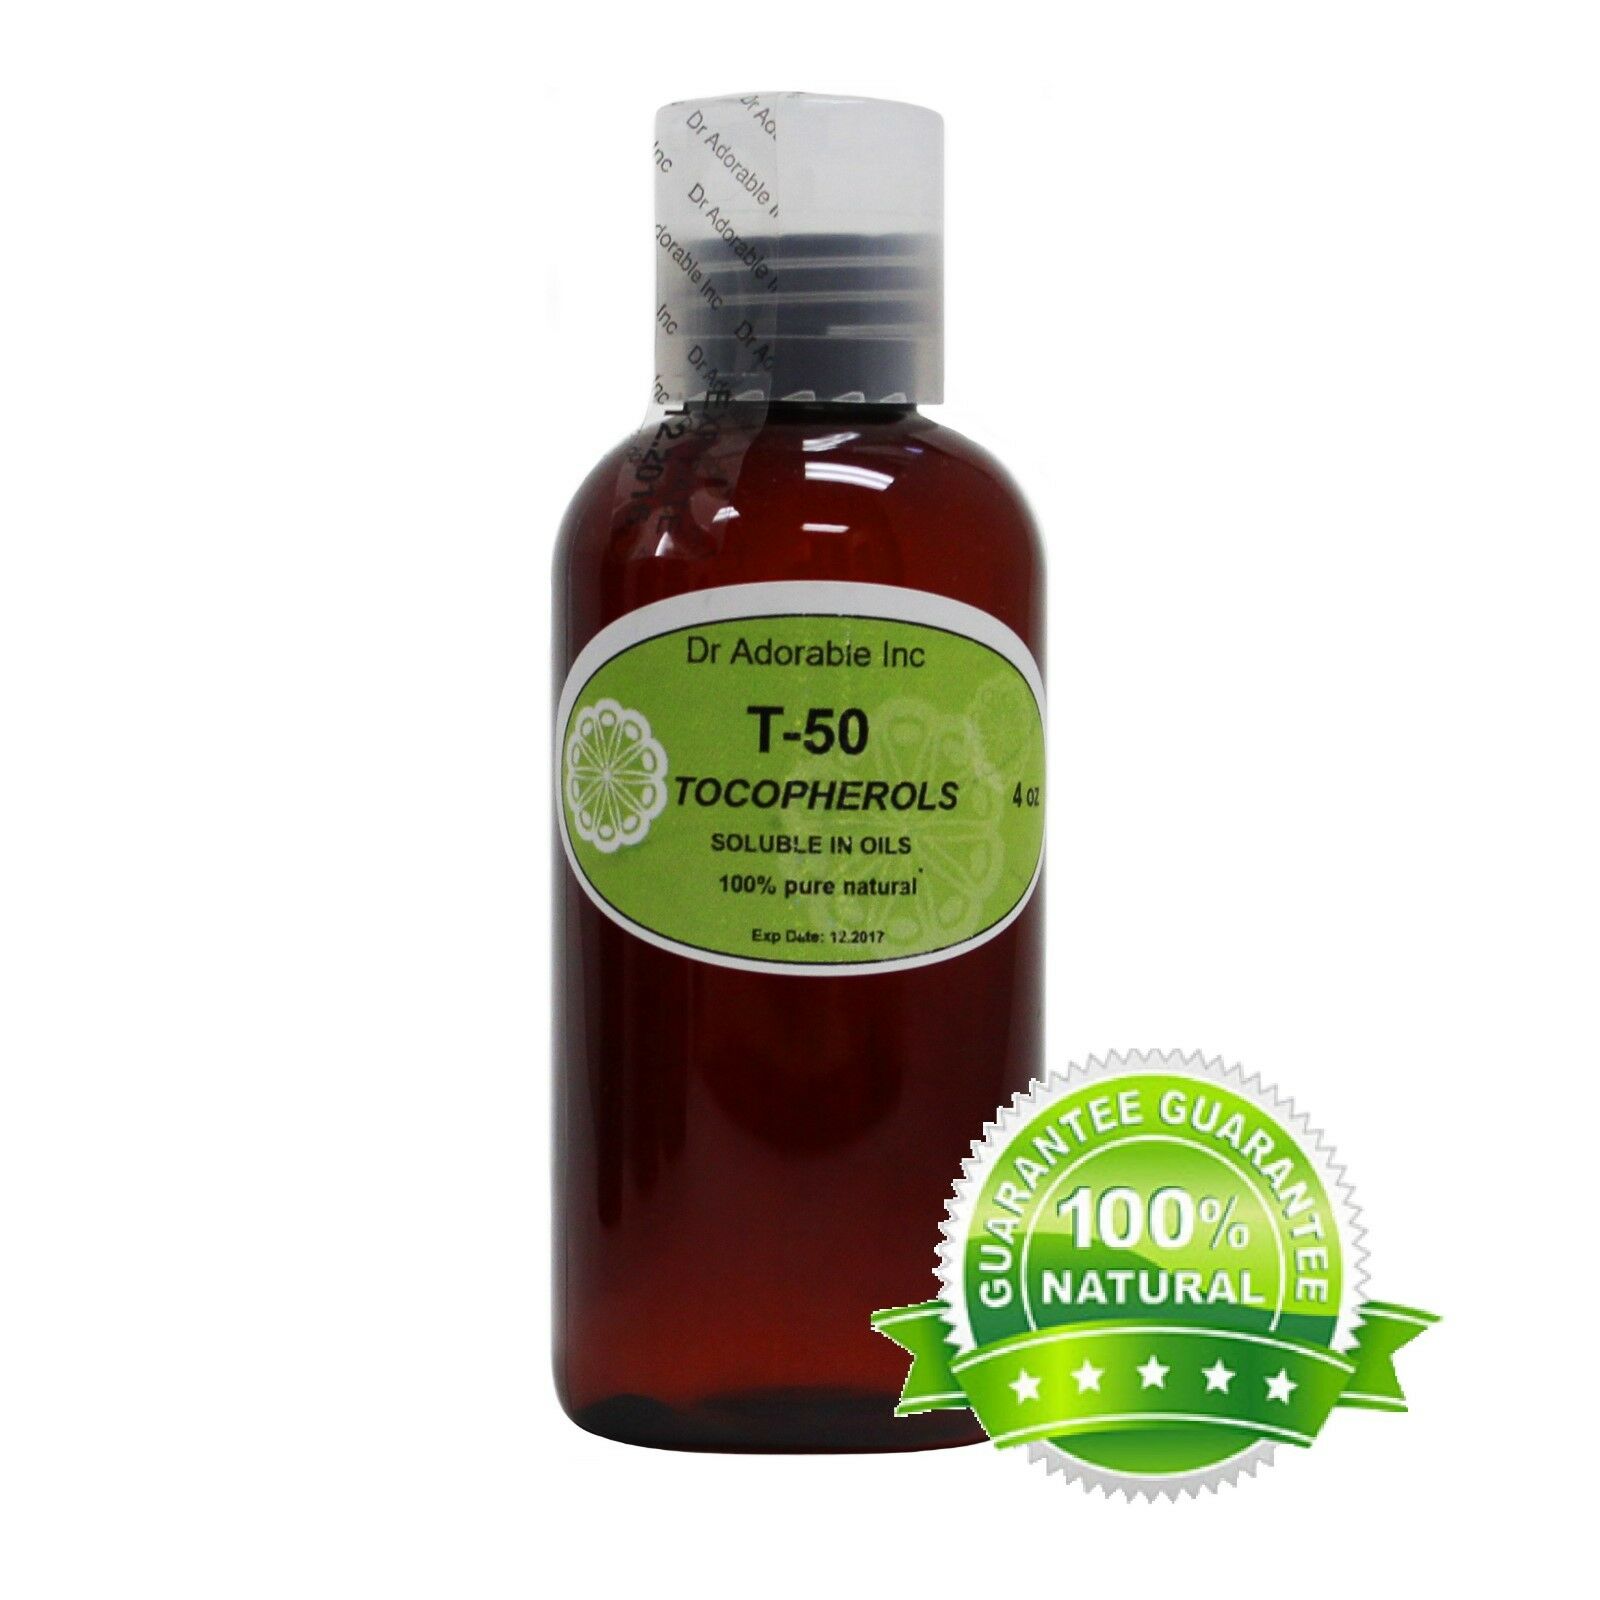 TOCOPHEROL T-50  SOLUBLE IN OILS VITAMIN E ANTI AGING FROM 2 OZ UP TO 1 GALLON